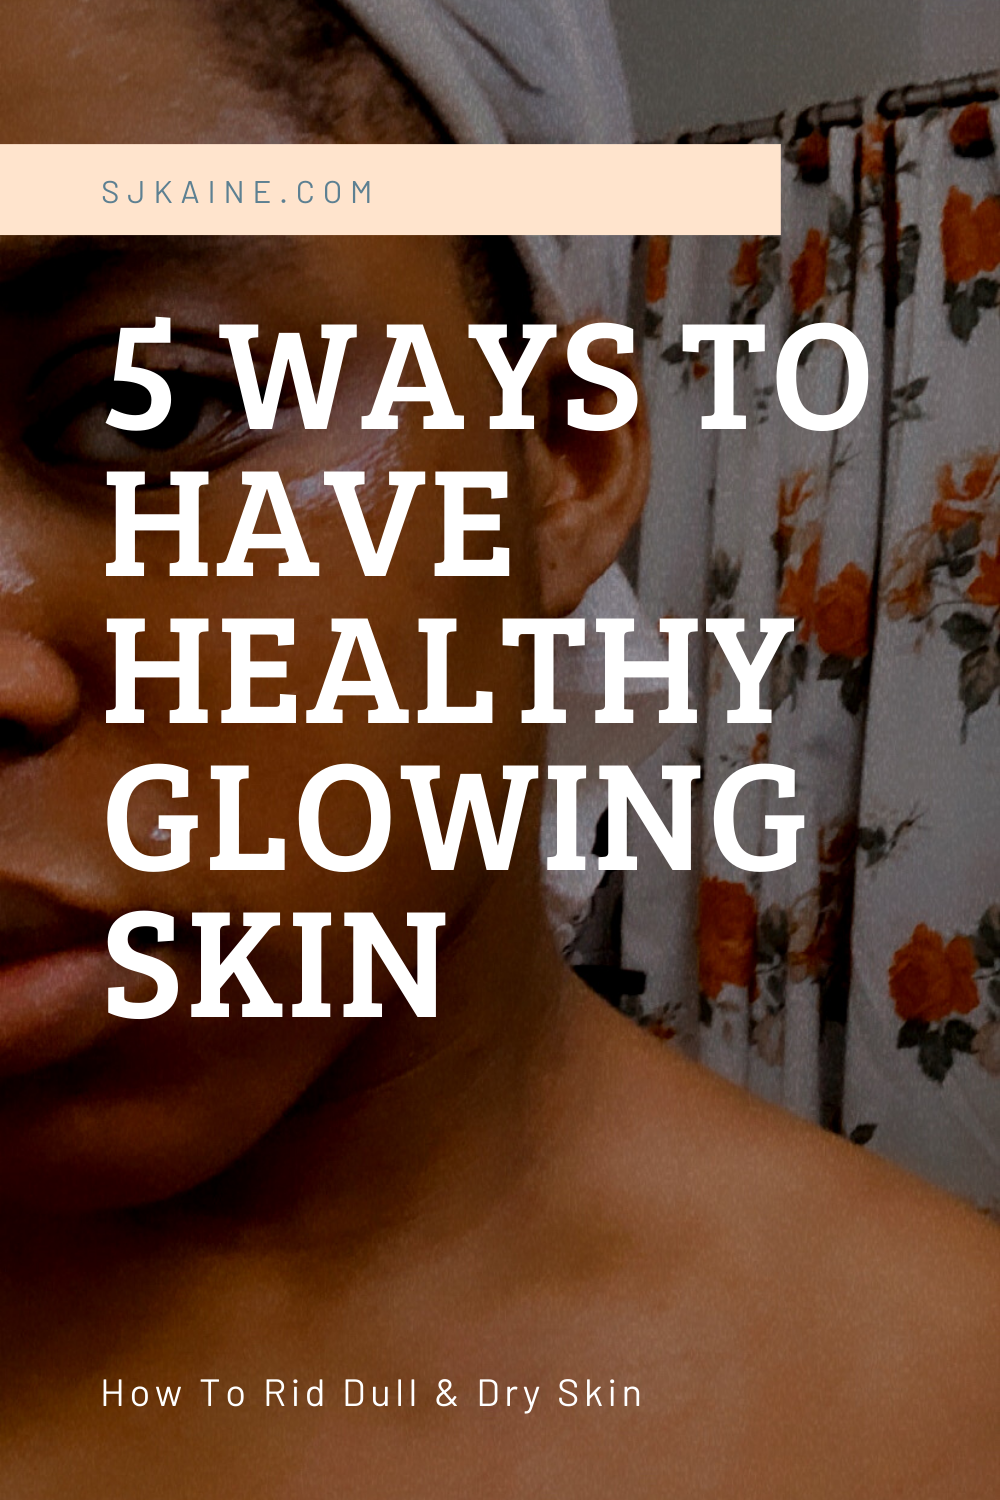 5 Ways to Have Healthy Glowing Skin